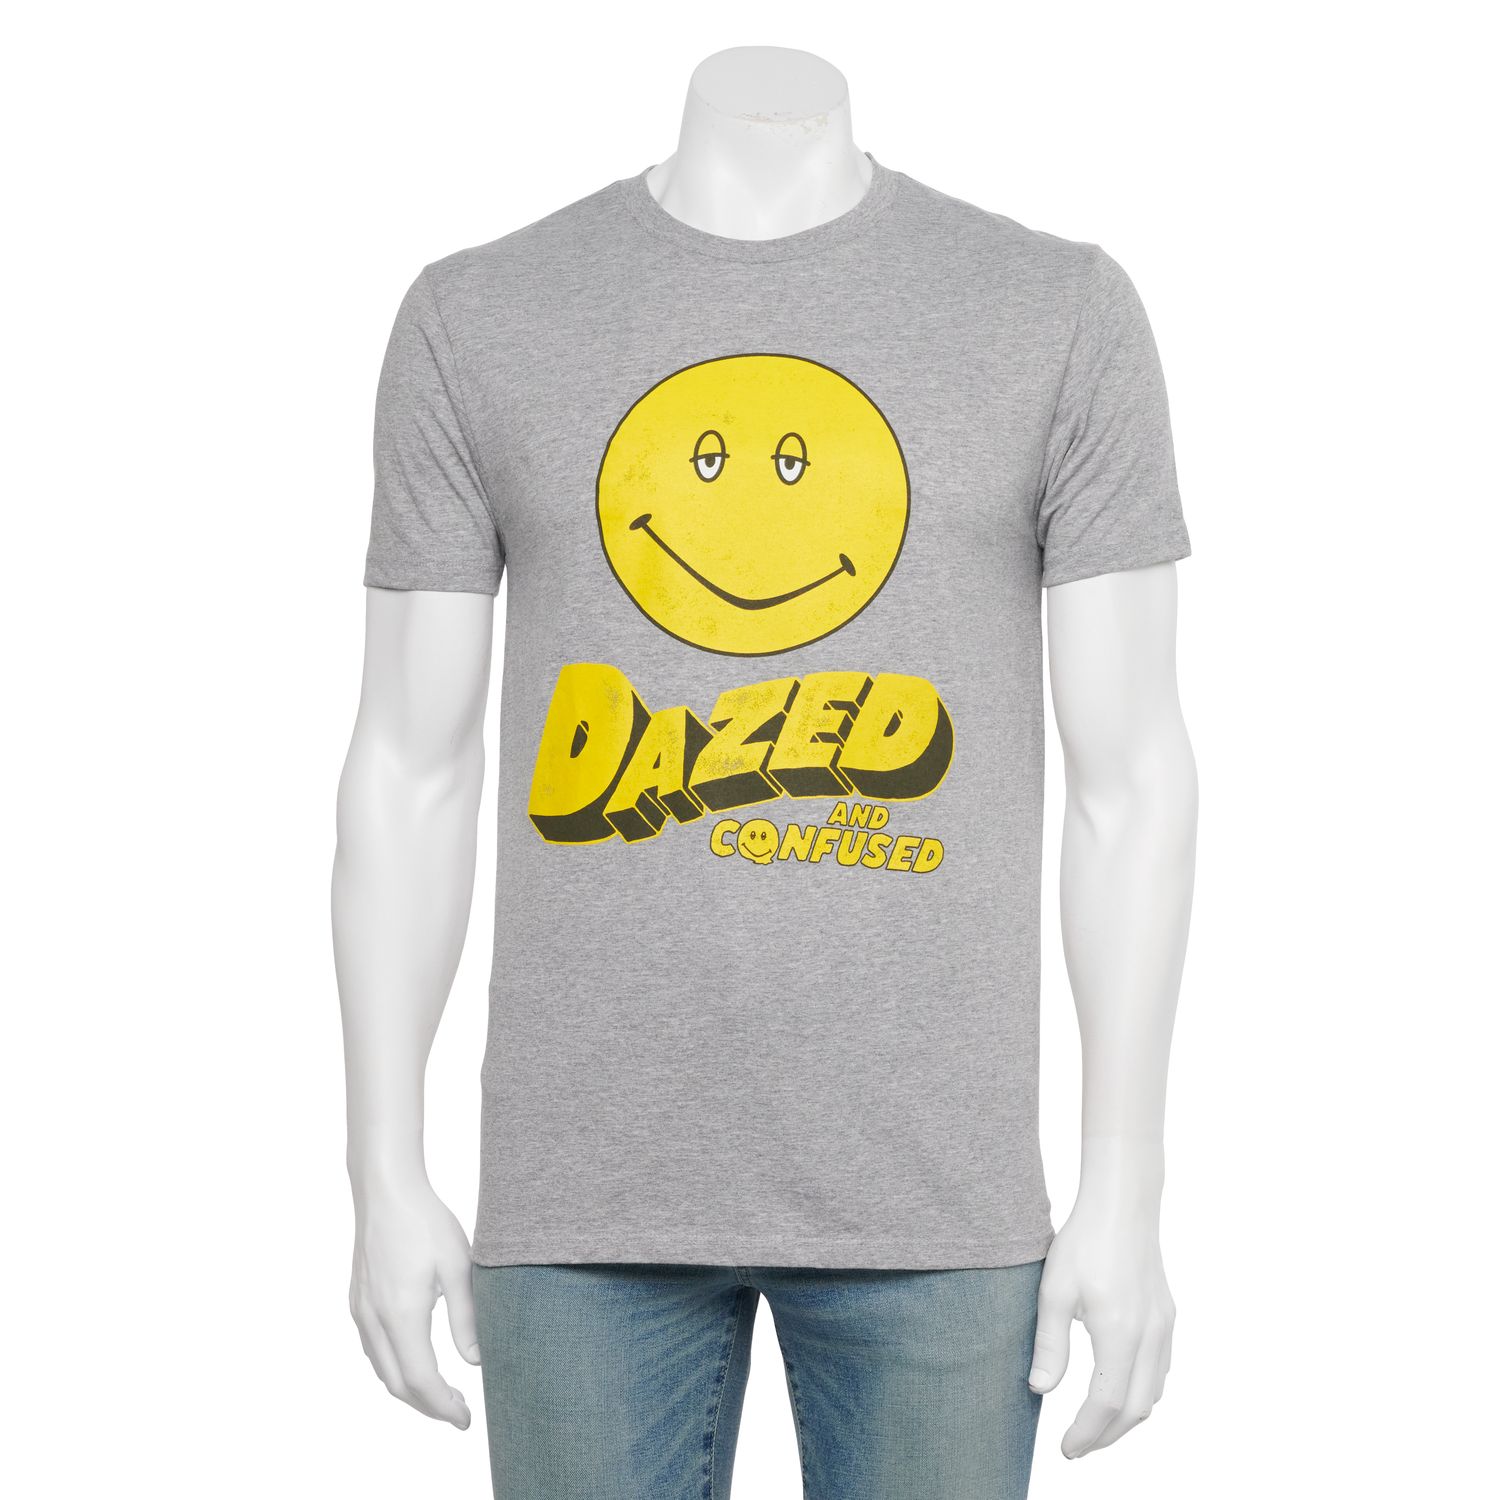 Image for Licensed Character Men's Dazed and Confused Tee at Kohl's.